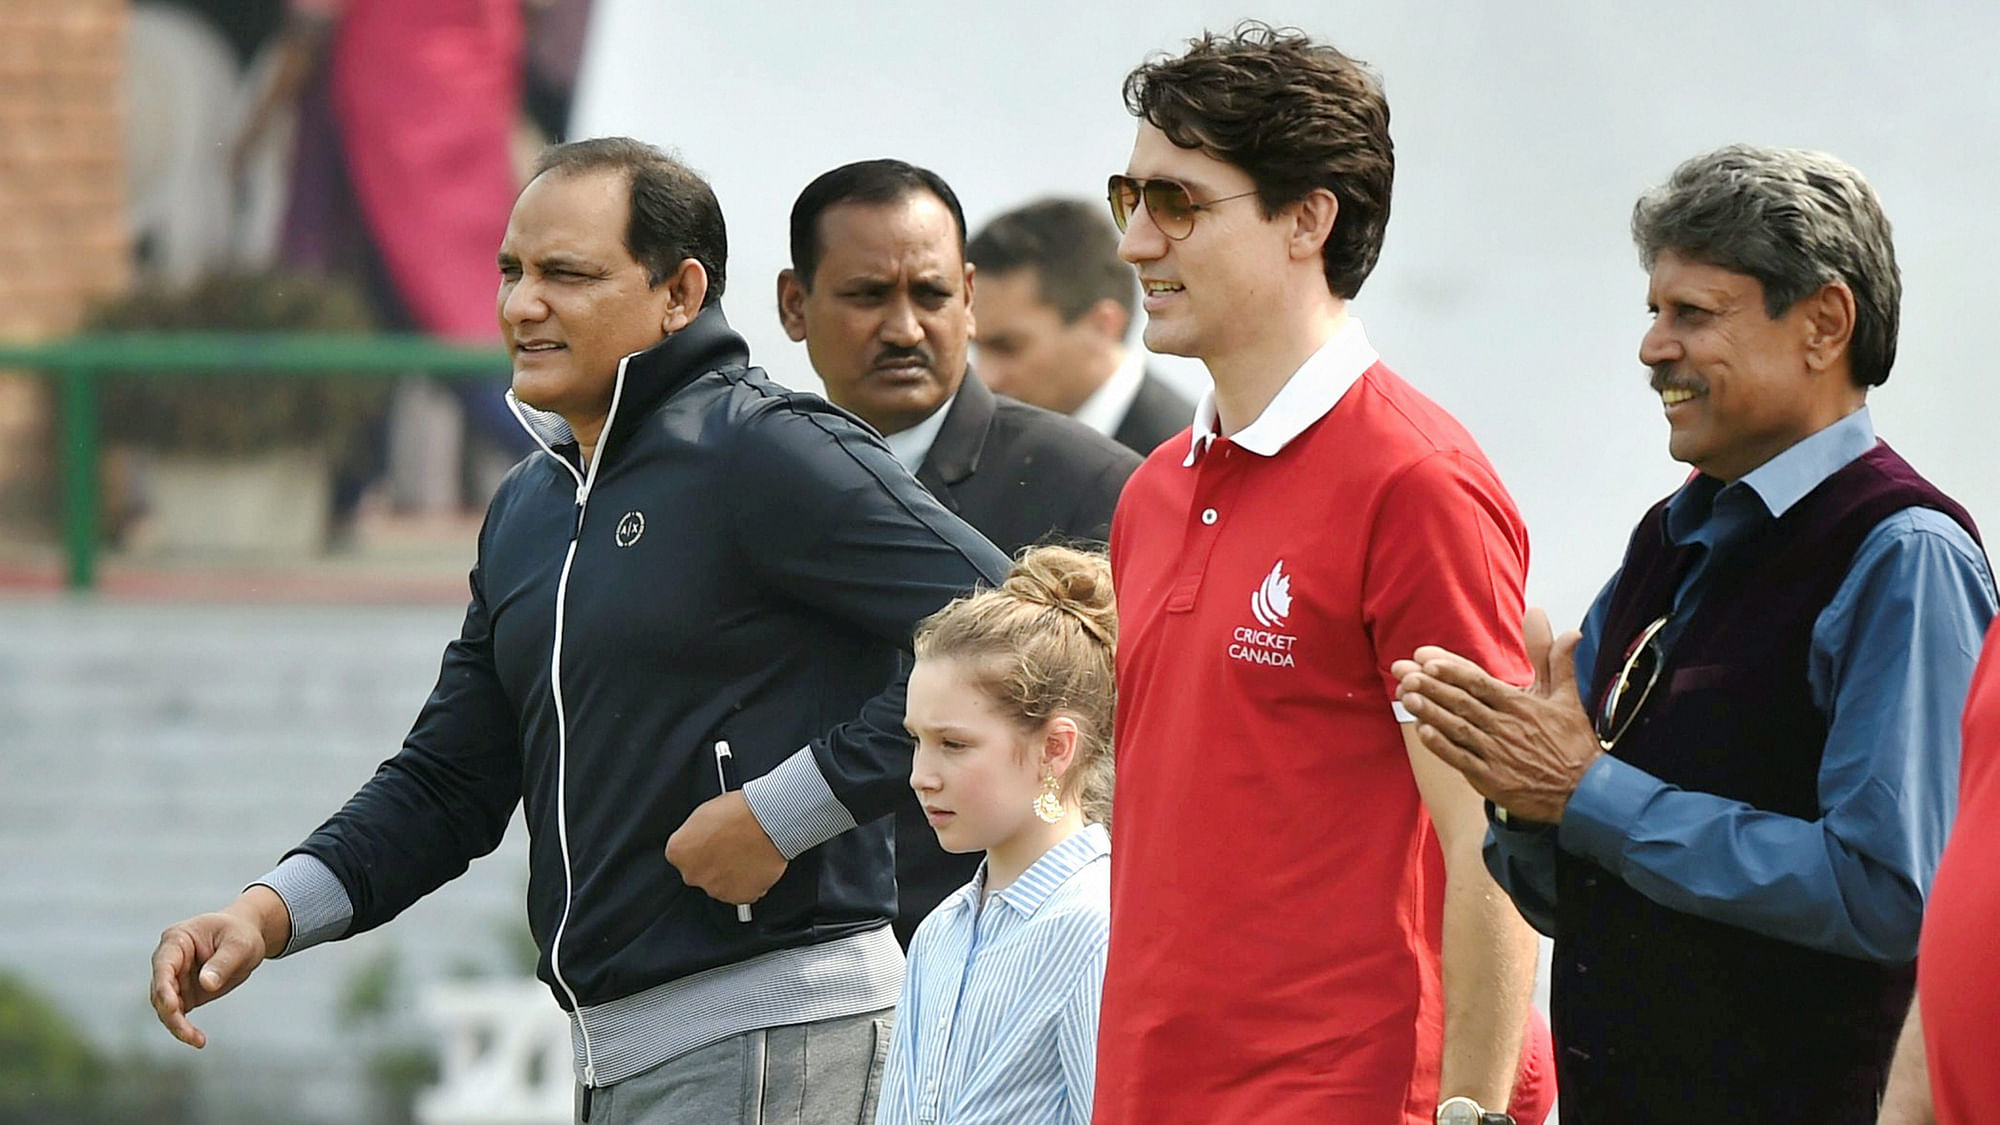 Canadian Prime Minister Justin Trudeau with former India captains Mohammad Azharuddin and Kapil Dev in New Delhi.